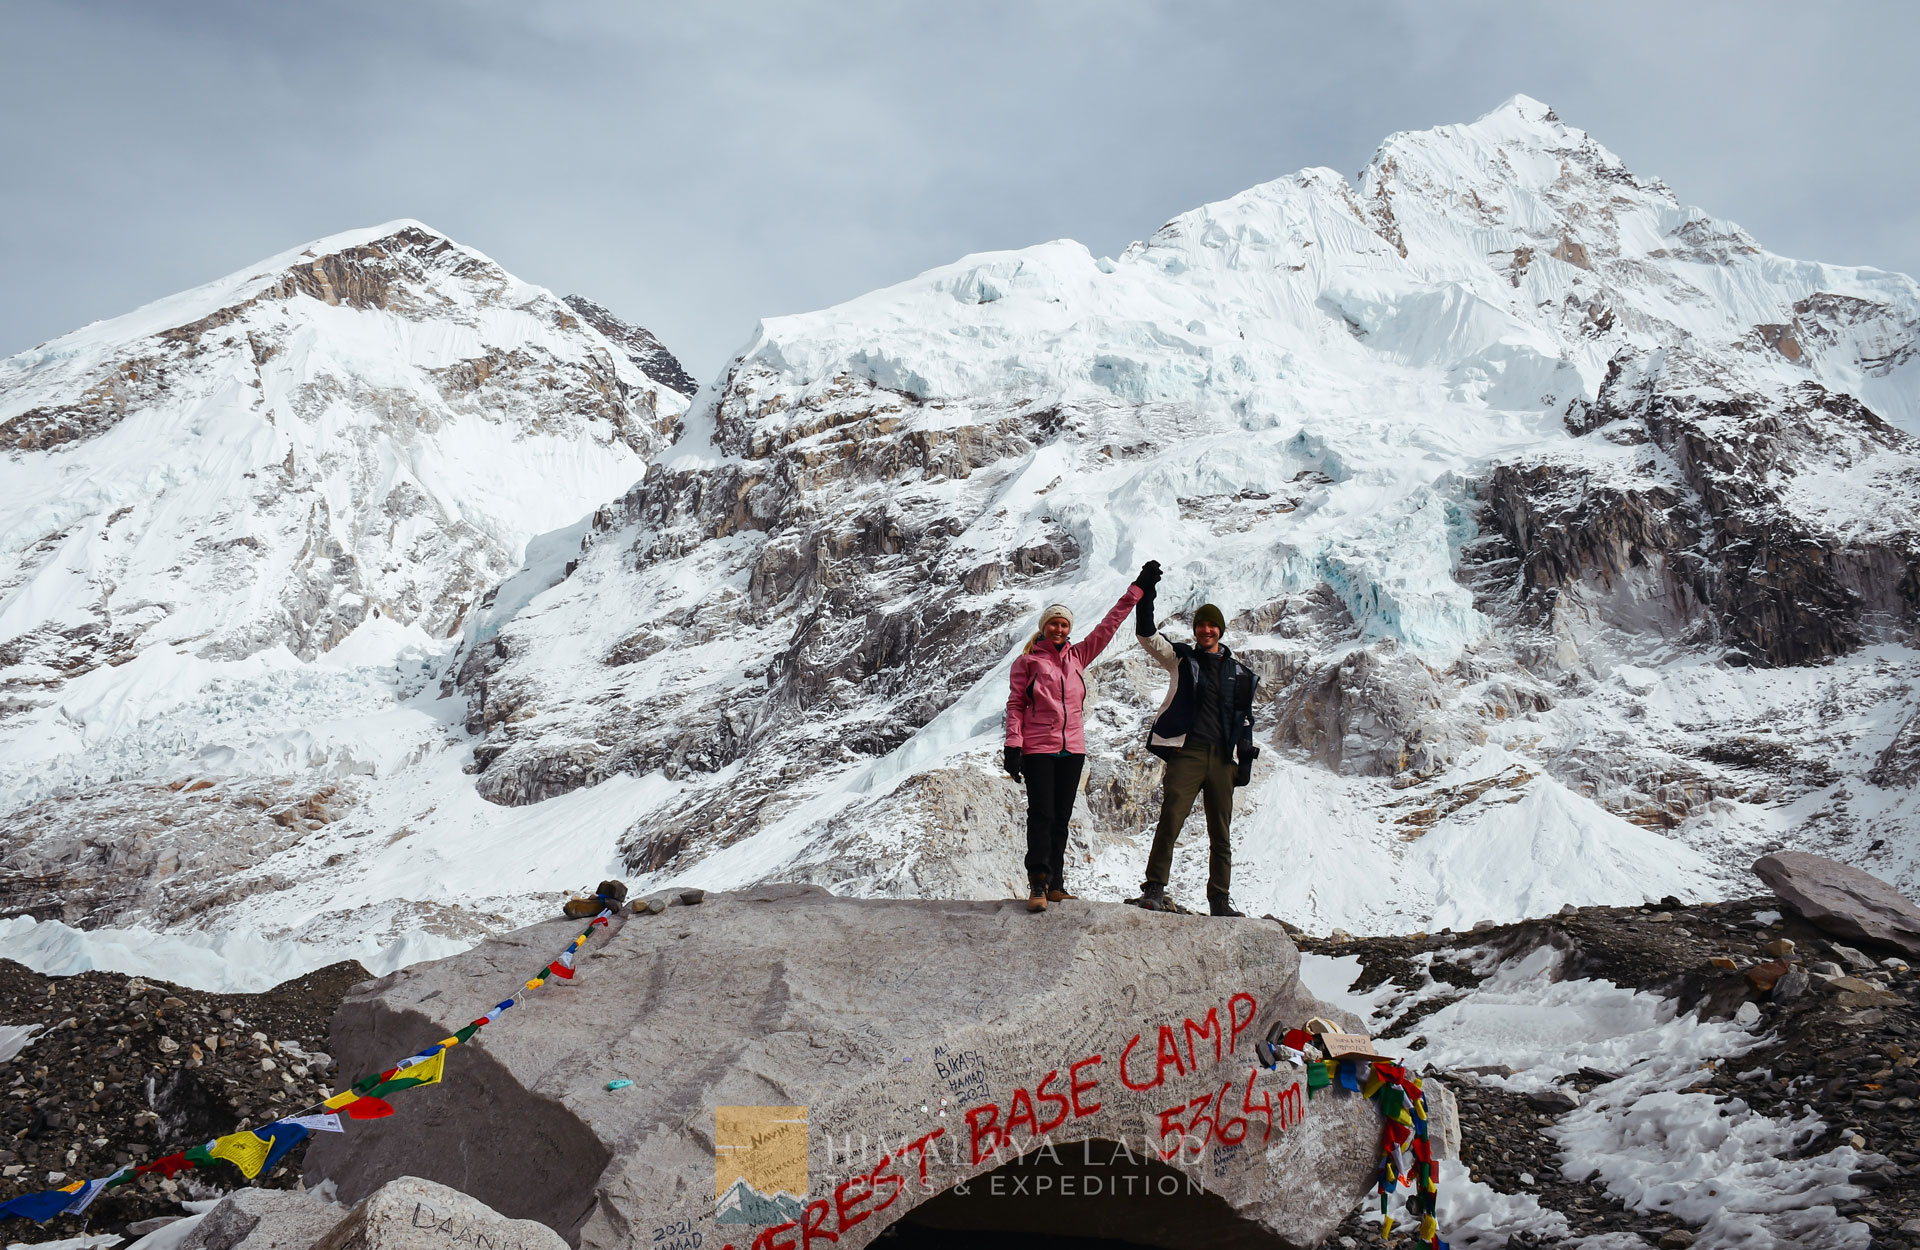 client celebrates their incredible achievement at the Everest Base Camp Summit.